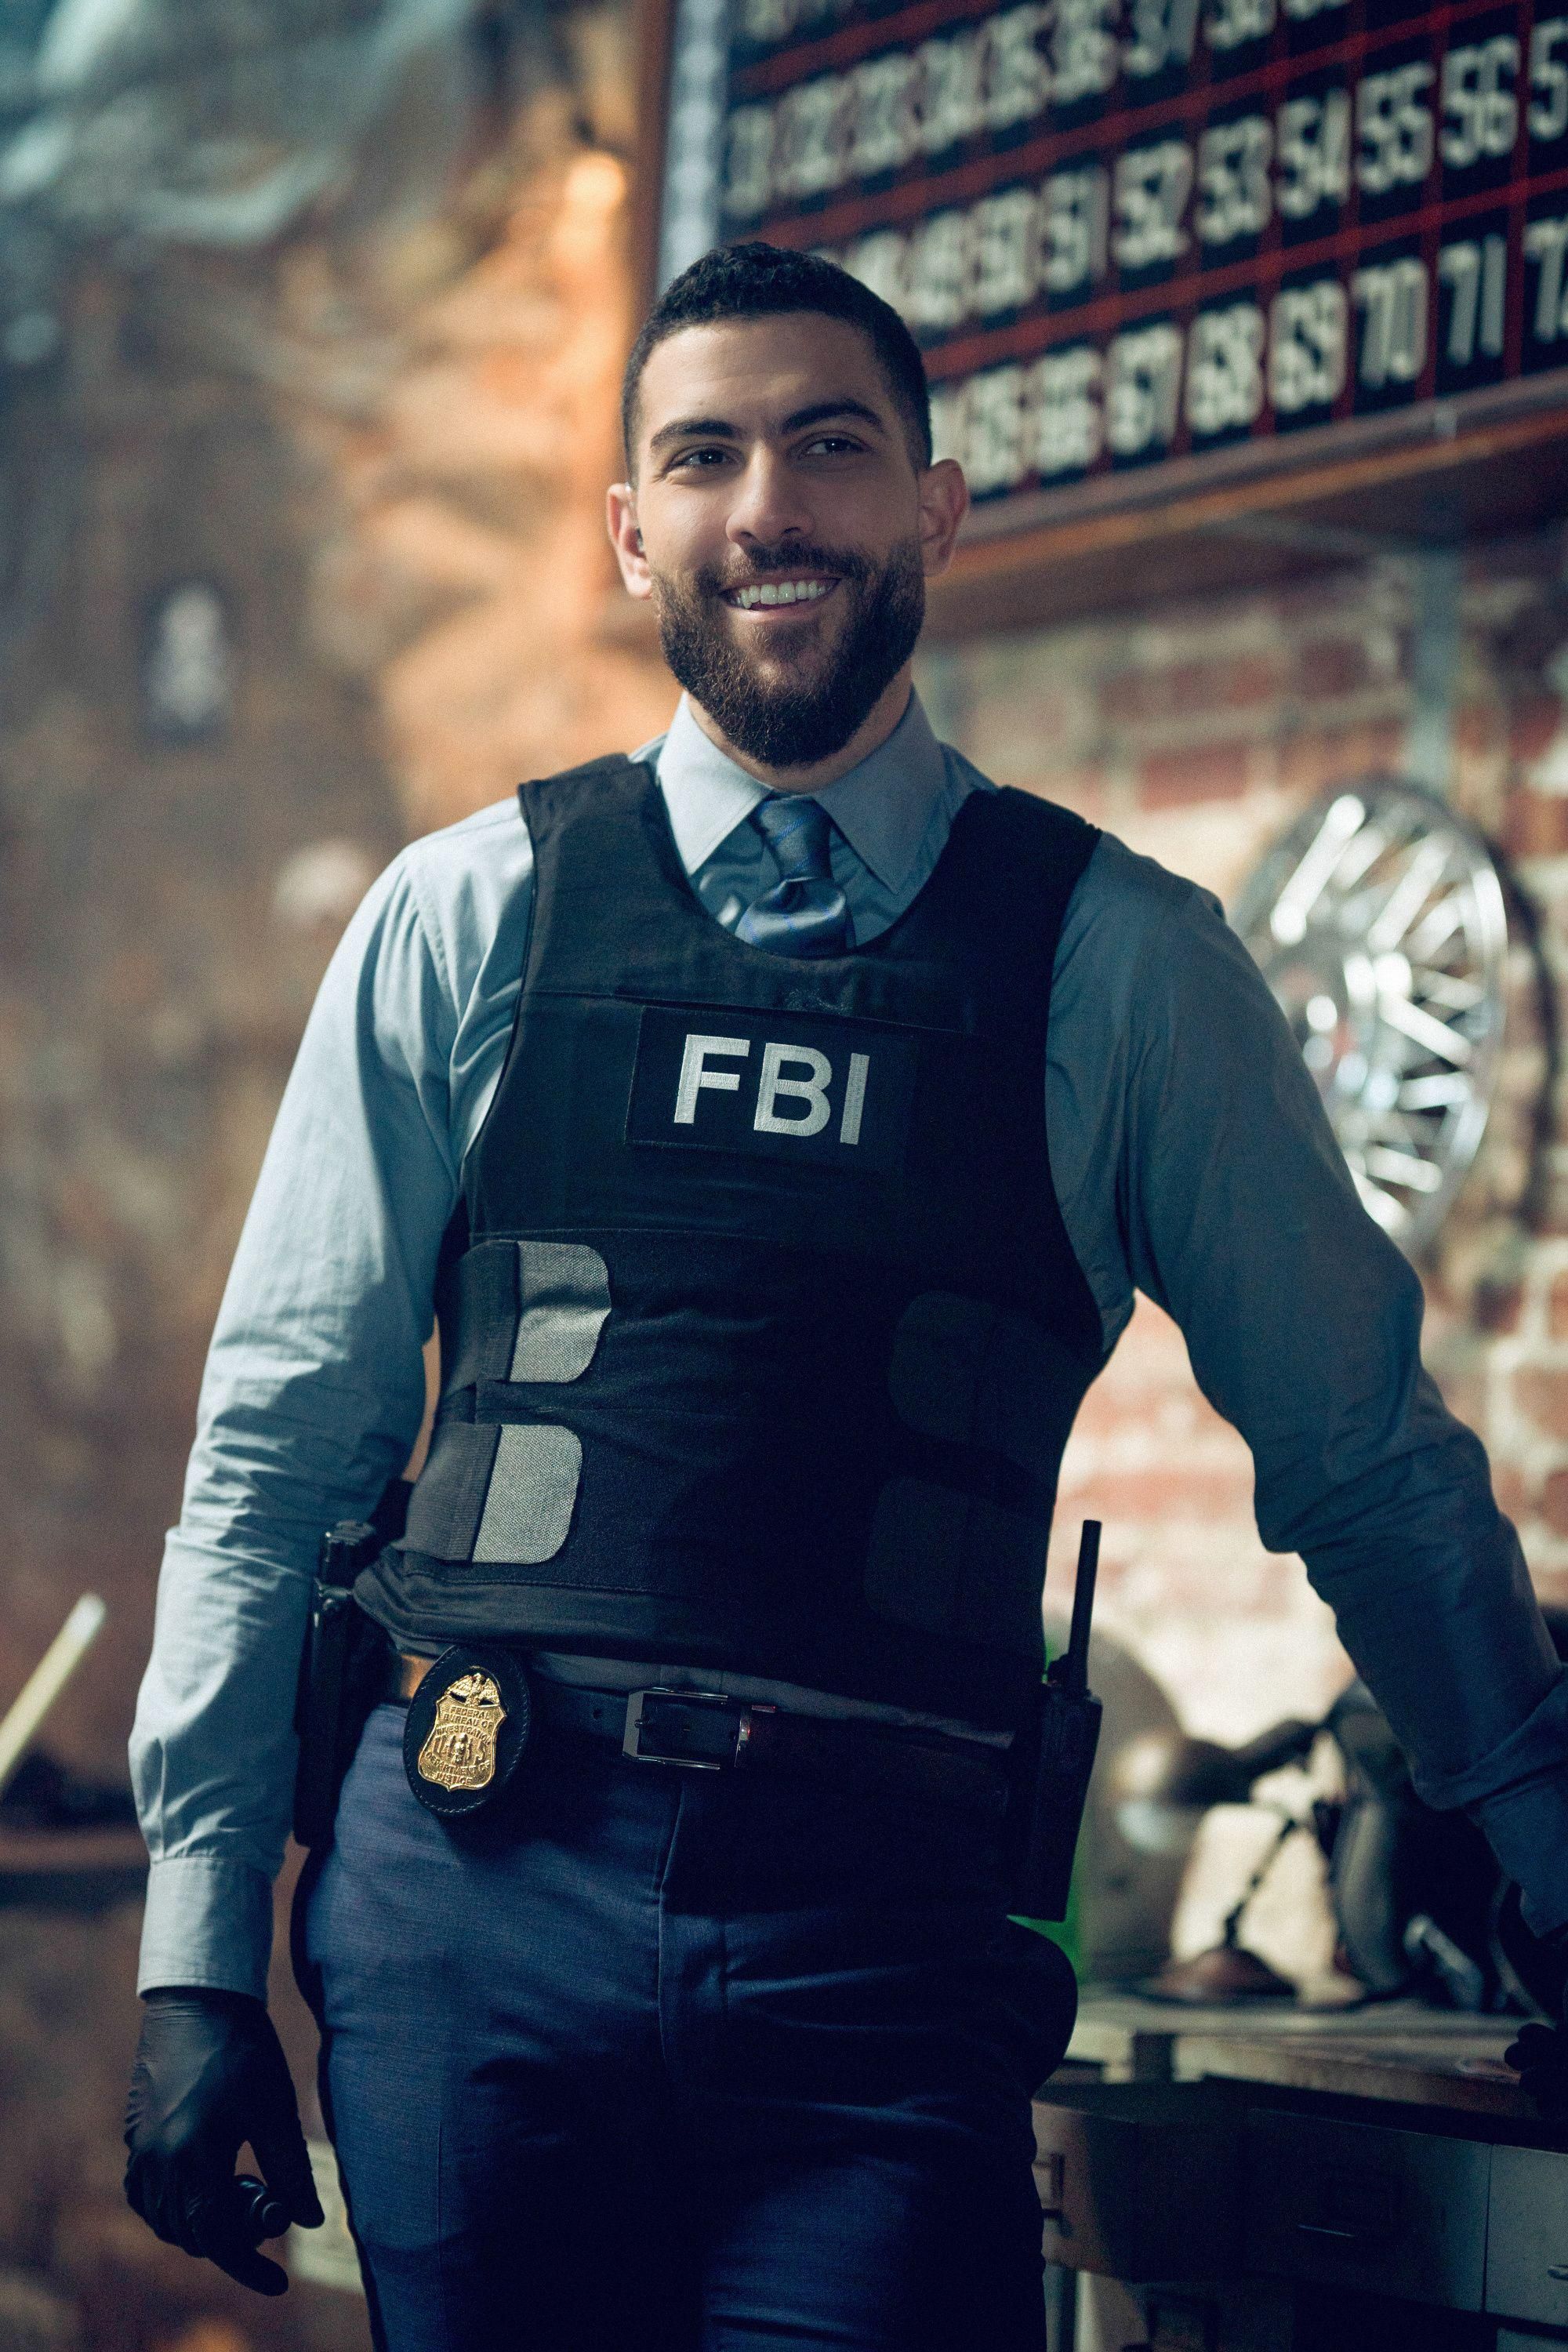 Actor Zeeko Zaki leans against a counter and smiles broadly in his tactical FBI vest